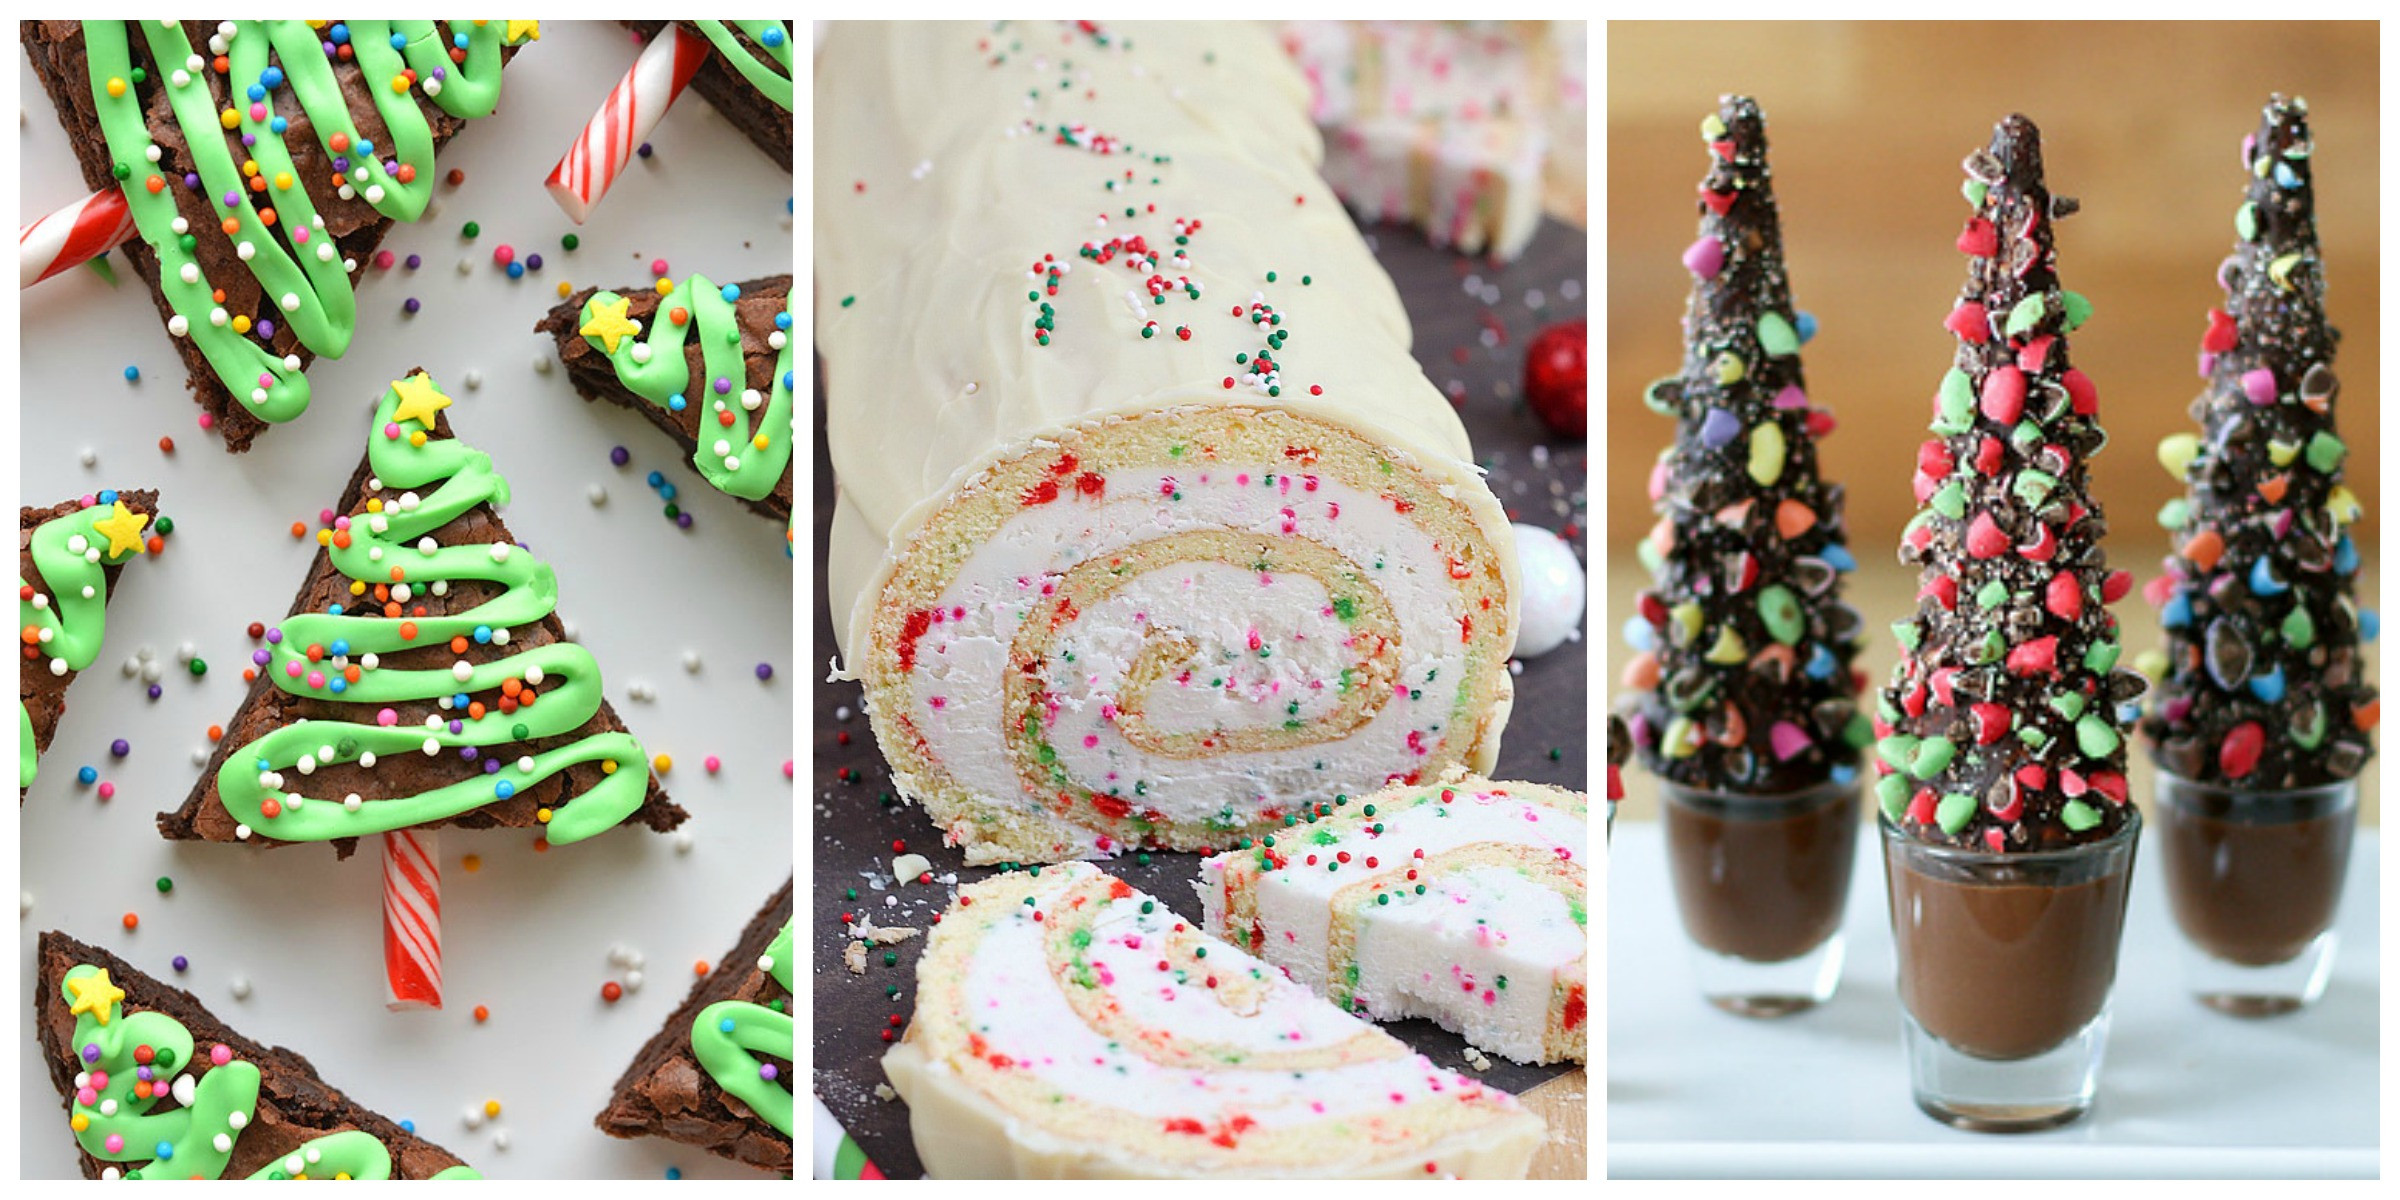 Easy Christmas Party Desserts
 57 Easy Christmas Dessert Recipes Best Ideas for Fun